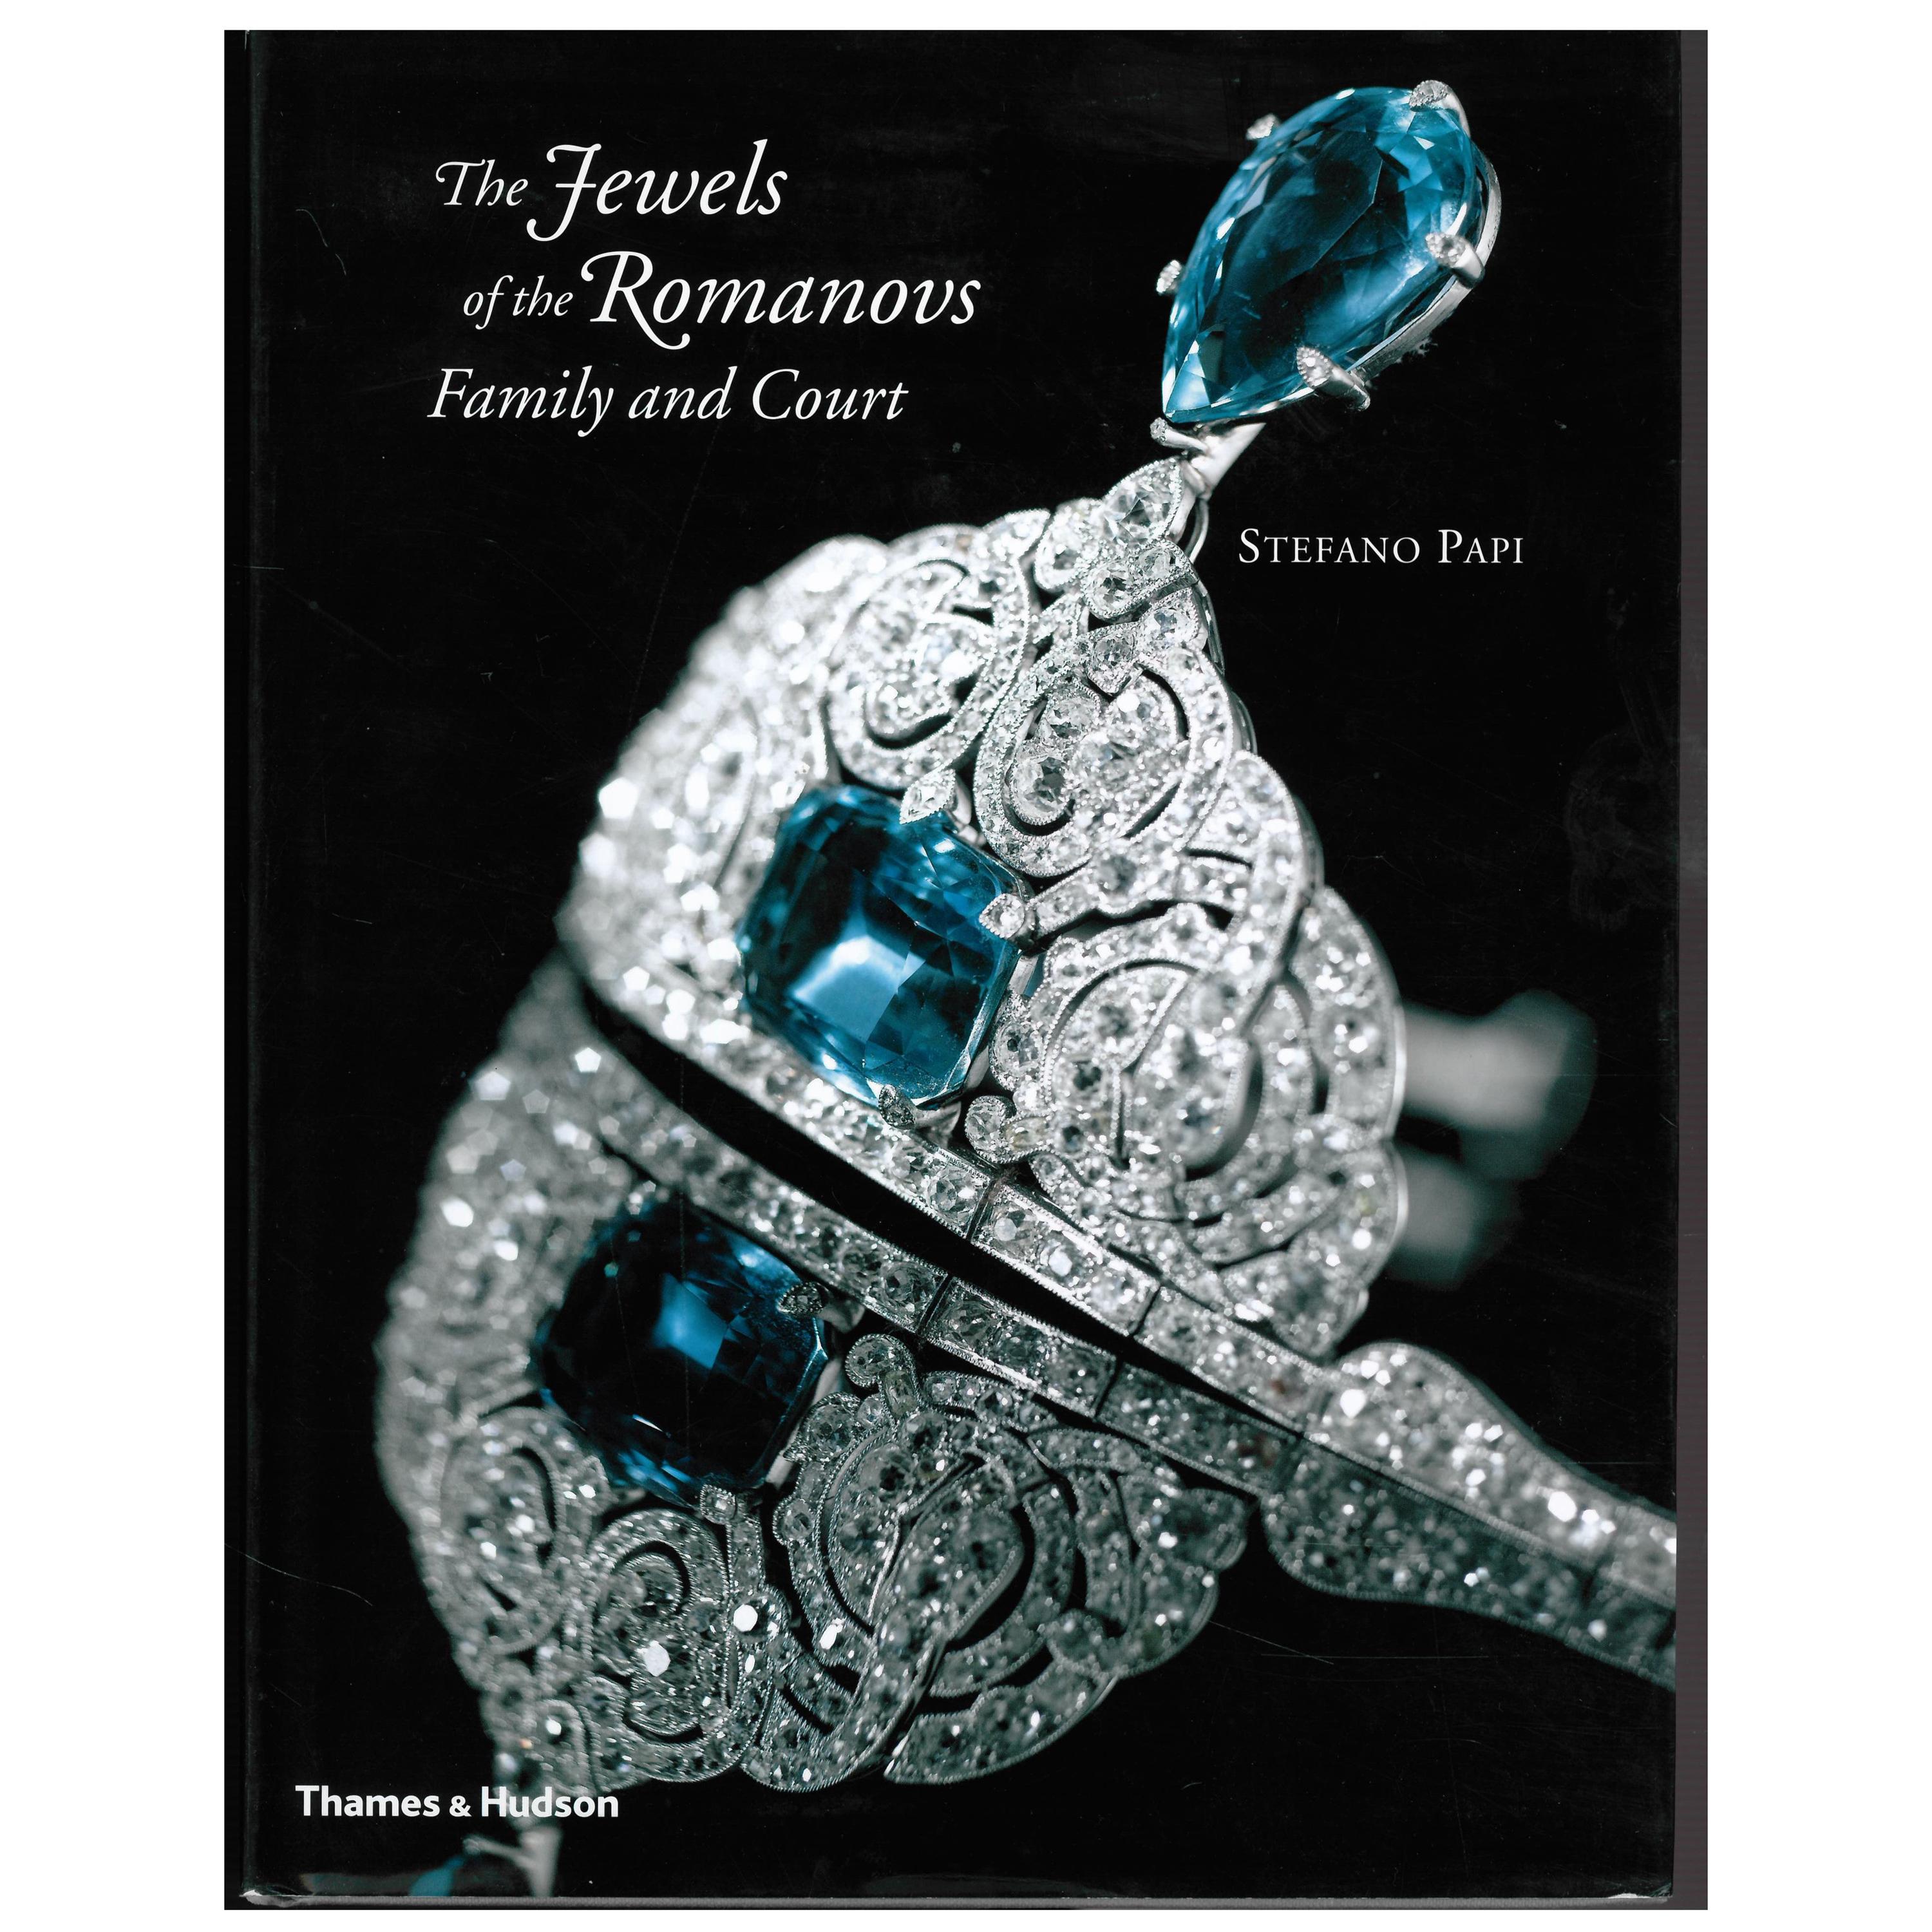 The Jewels of the Romanovs: Family and Court by Stefano Papi (Book)